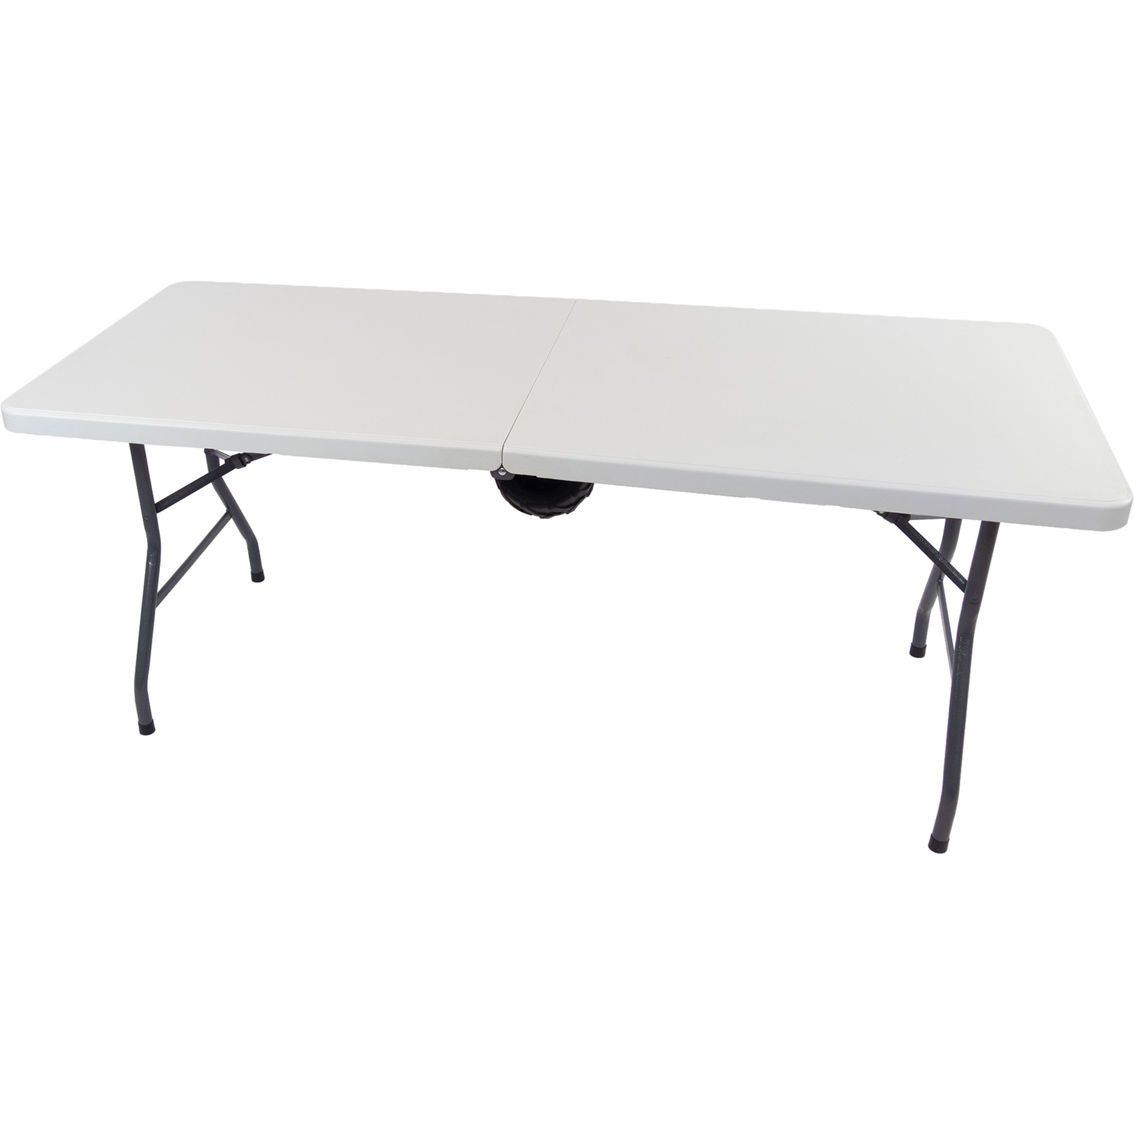 Creative The Rolling Table (White Table Only) - Image 1 of 2